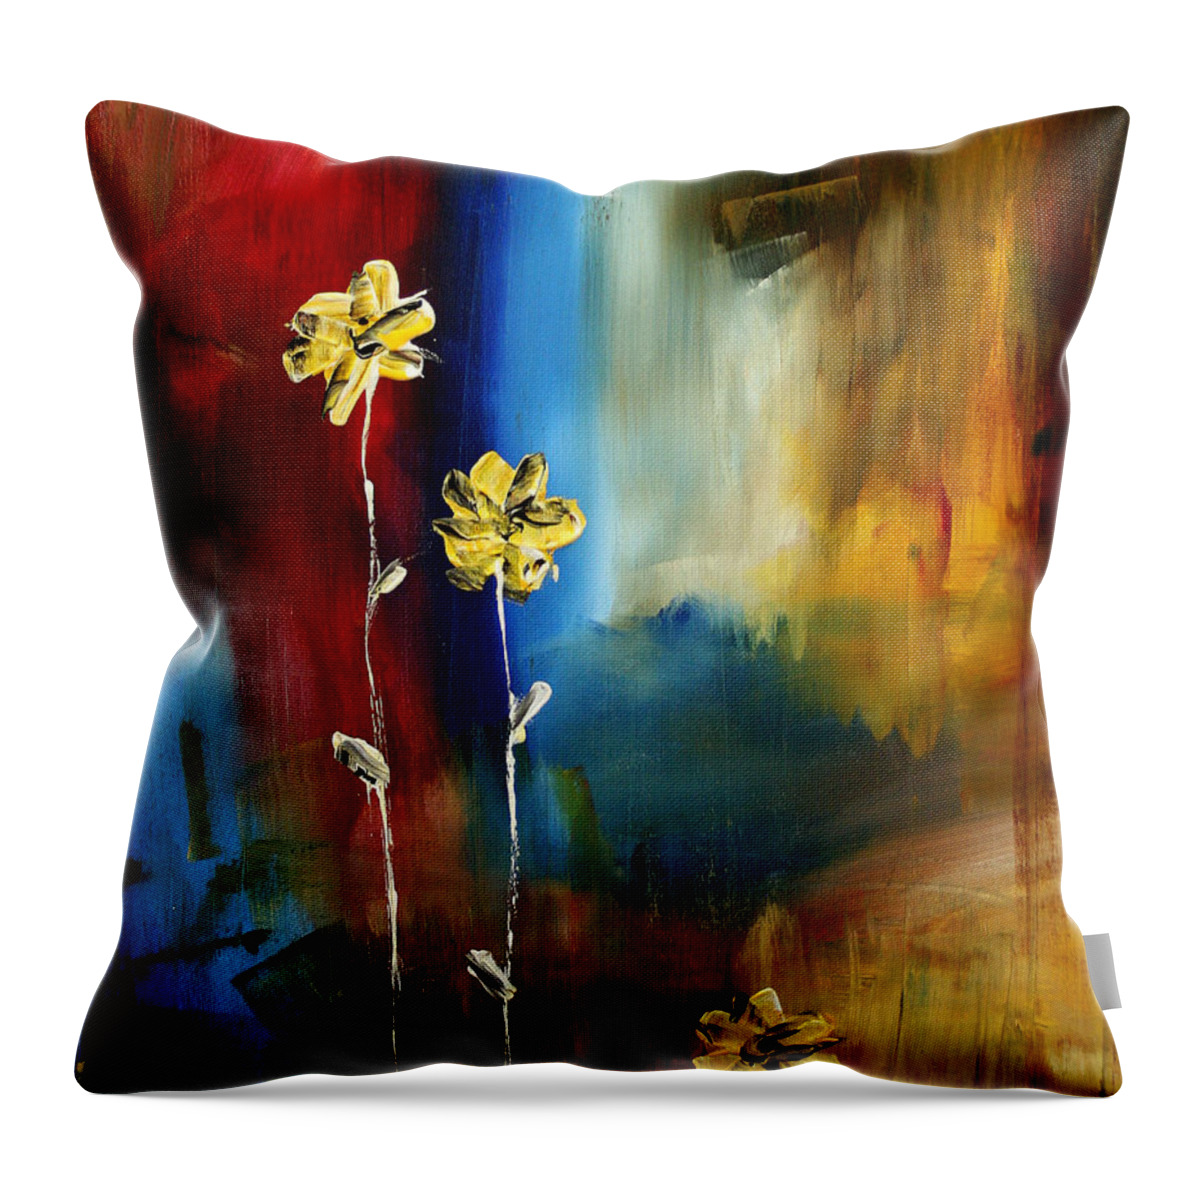 Wall Throw Pillow featuring the painting Soft Touch by Megan Duncanson